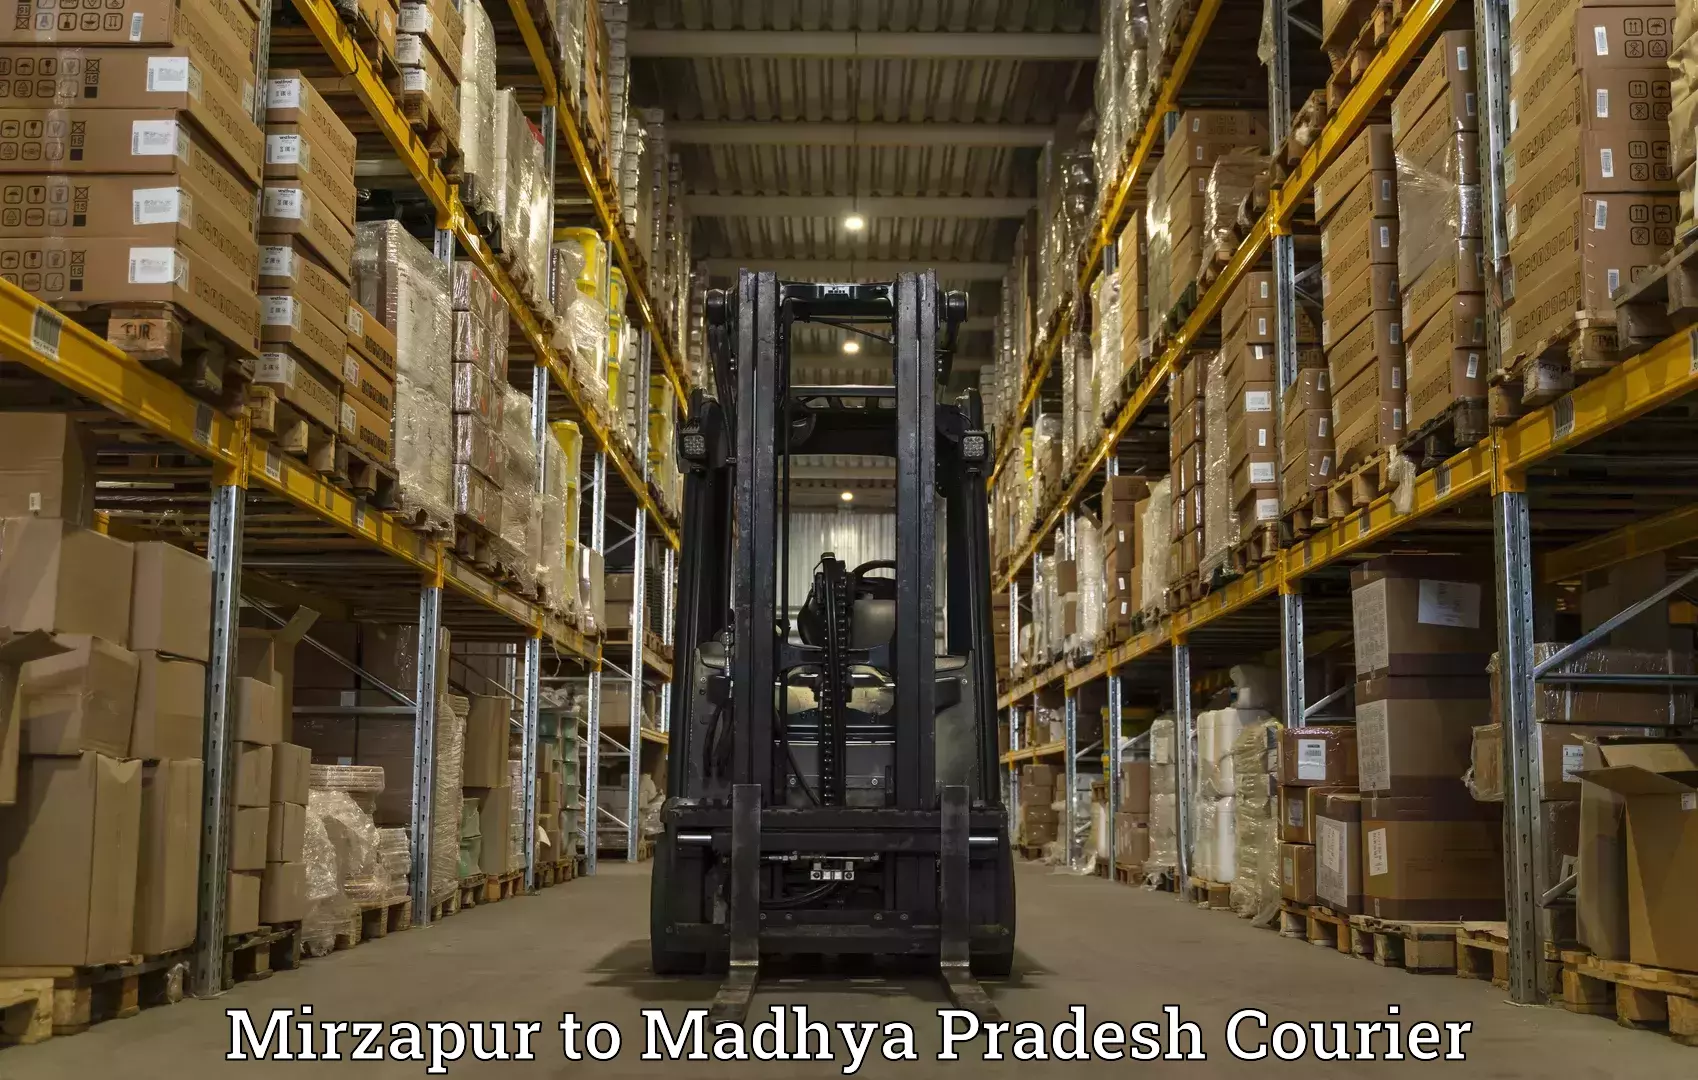 Express delivery solutions Mirzapur to Pachore